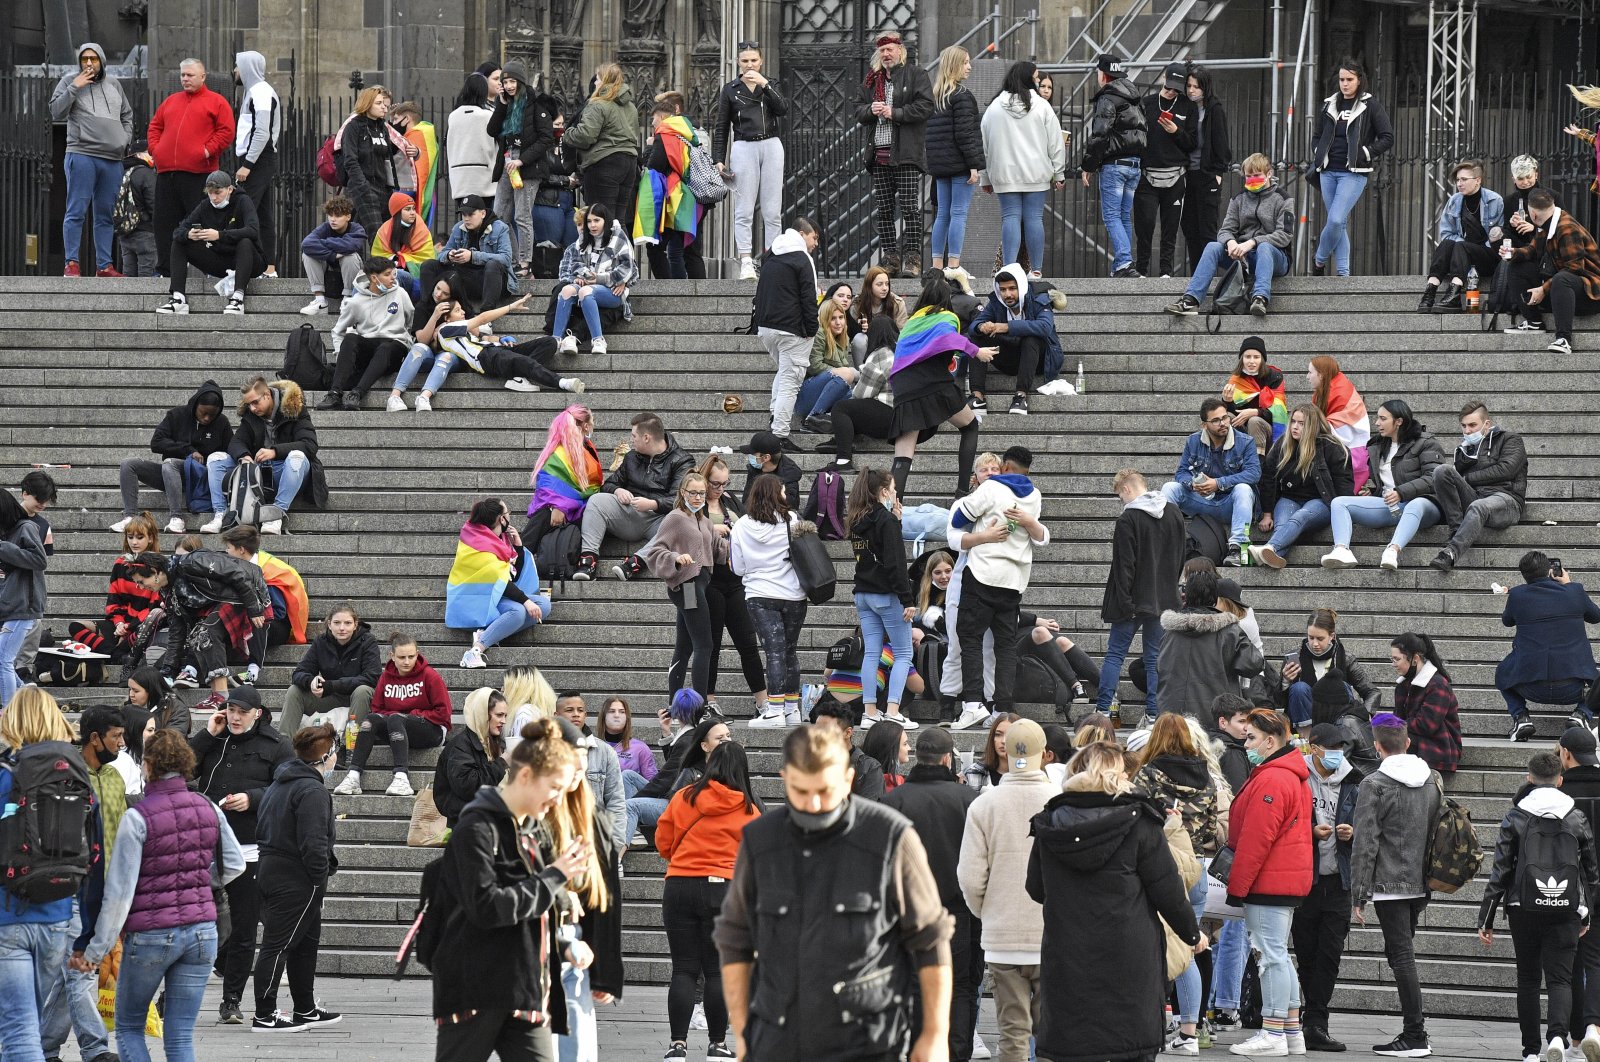 Young people meet without social distancing, despite the coronavirus pandemic, in front of the cathedral in the center of Cologne, Germany, Oct. 11, 2020. (AP Photo)